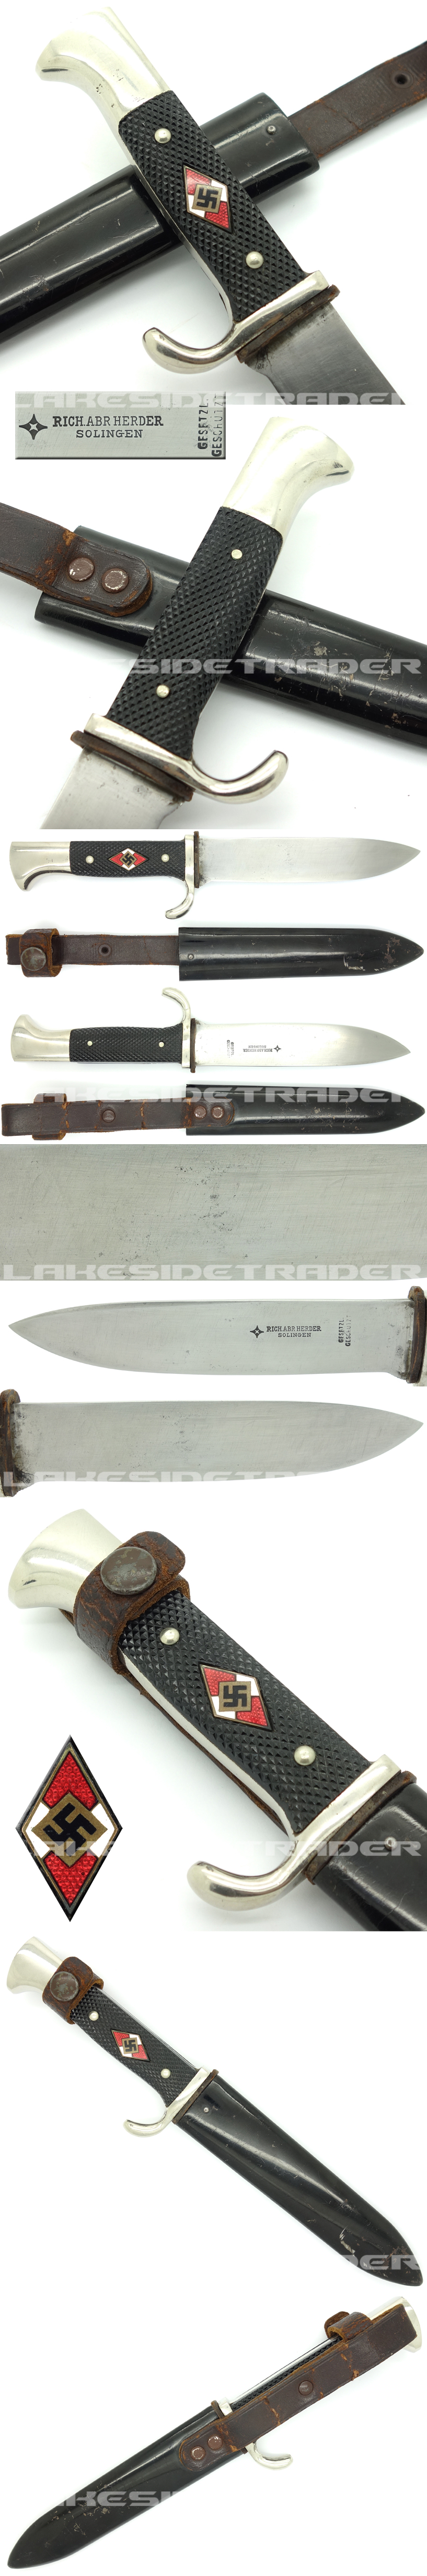 Early Hitler Youth Knife by Richard Herder